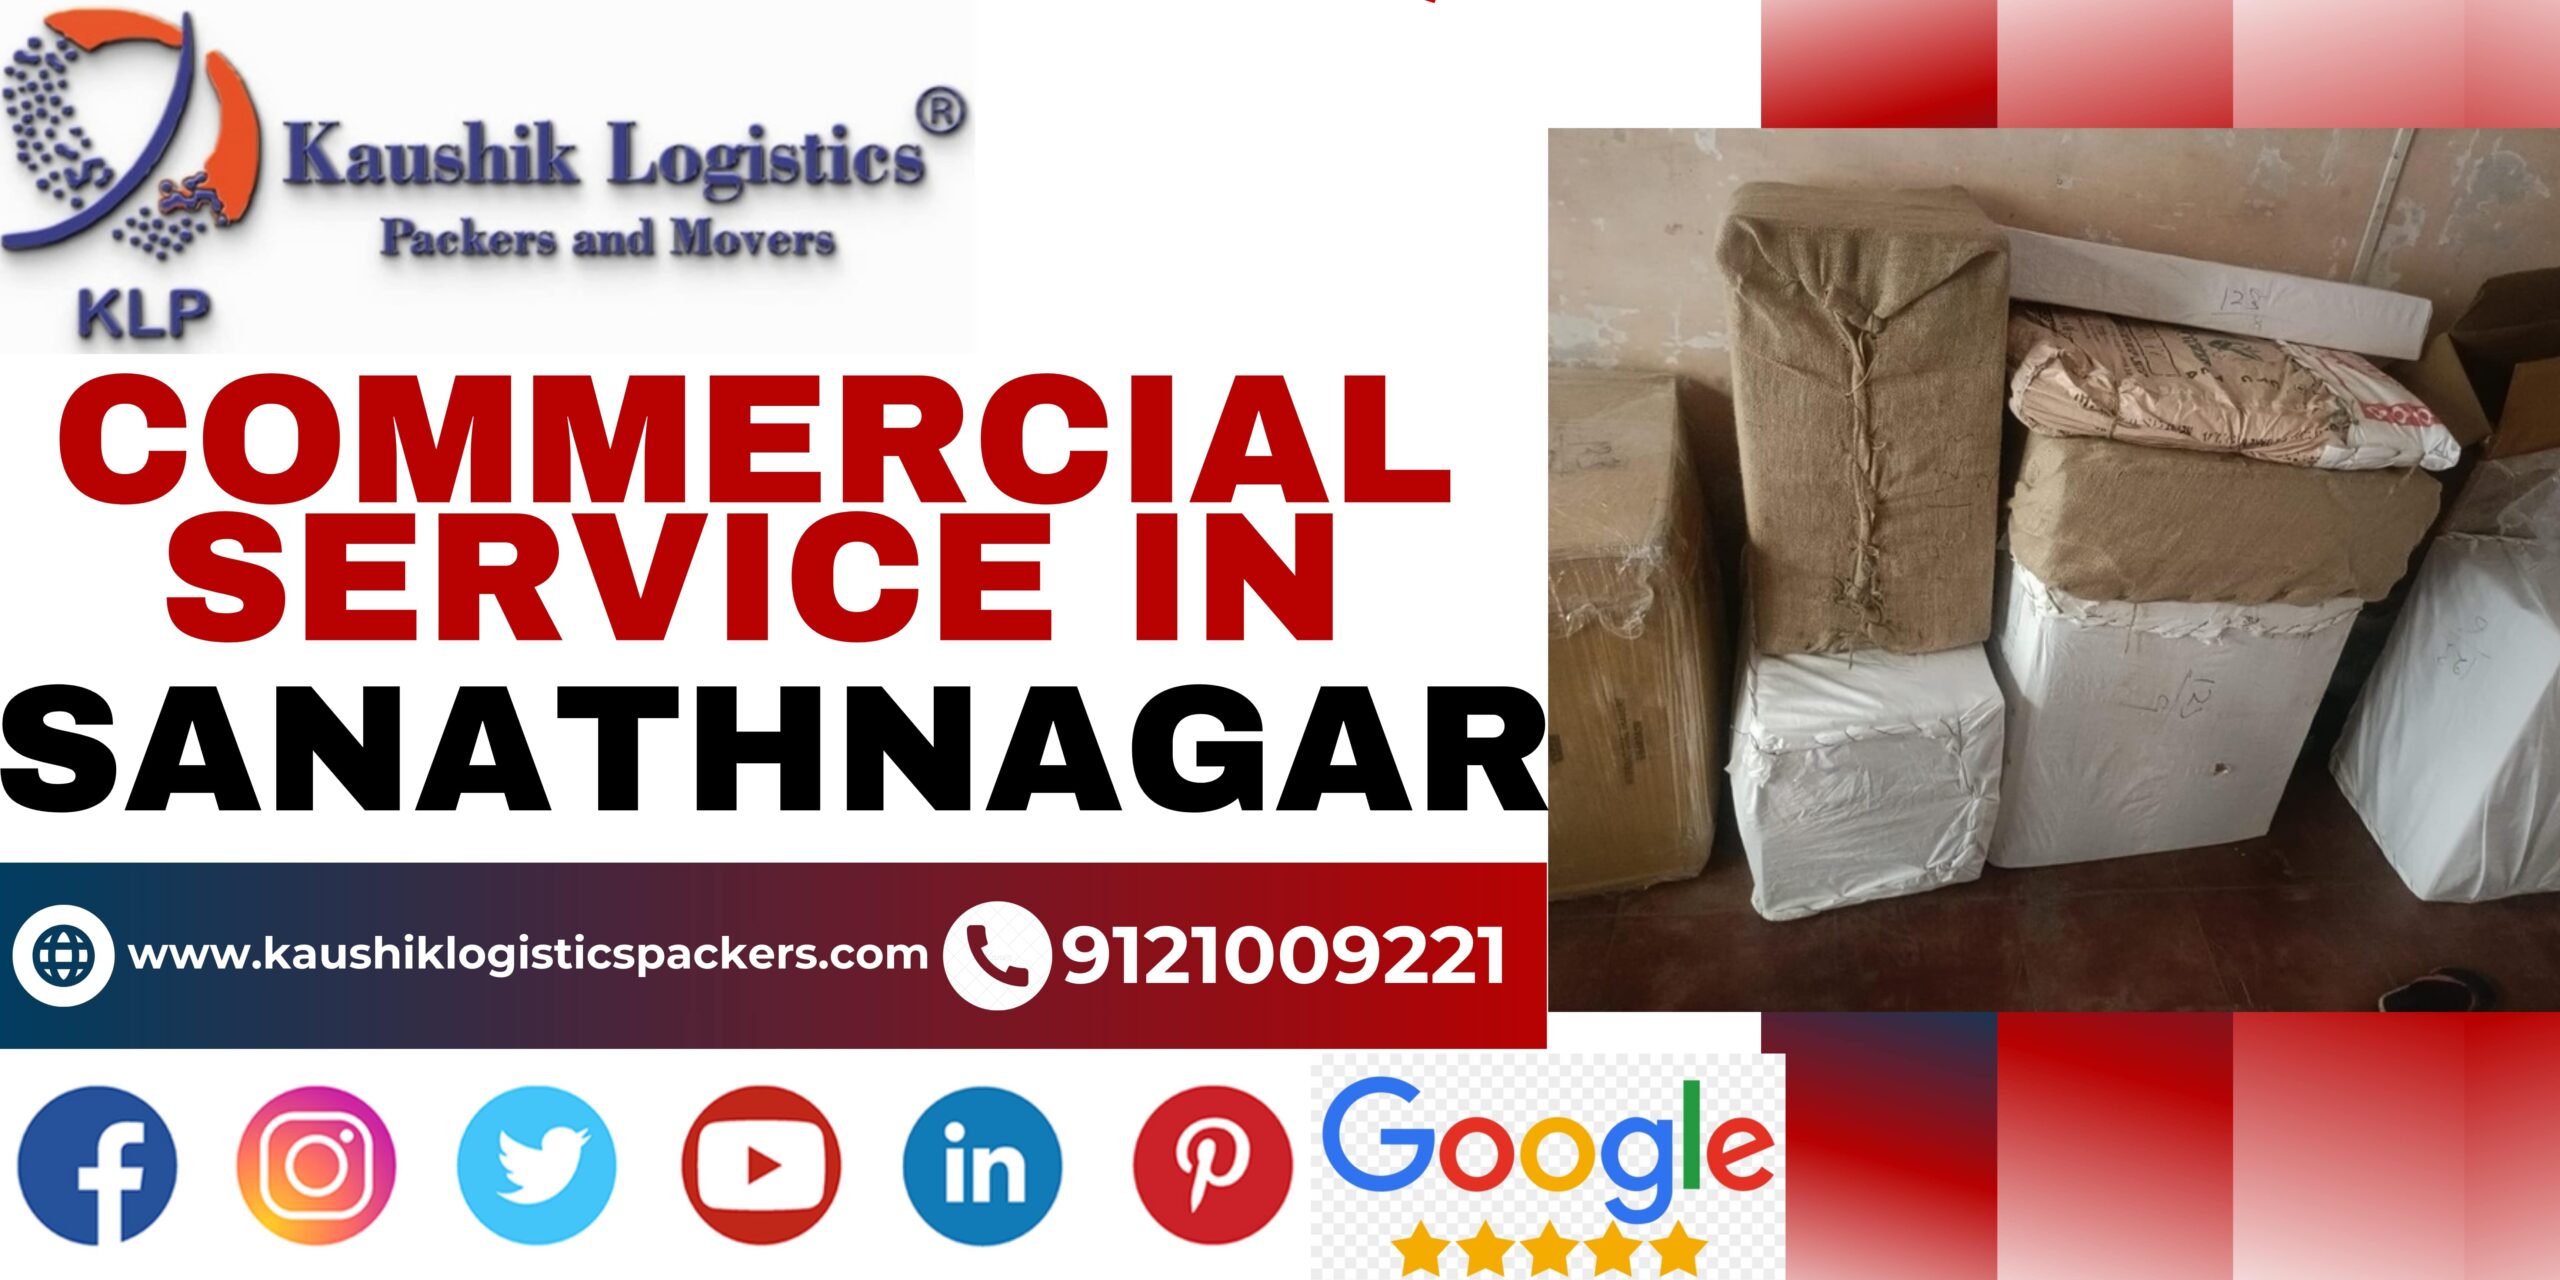 Packers and Movers In Sanathnagar